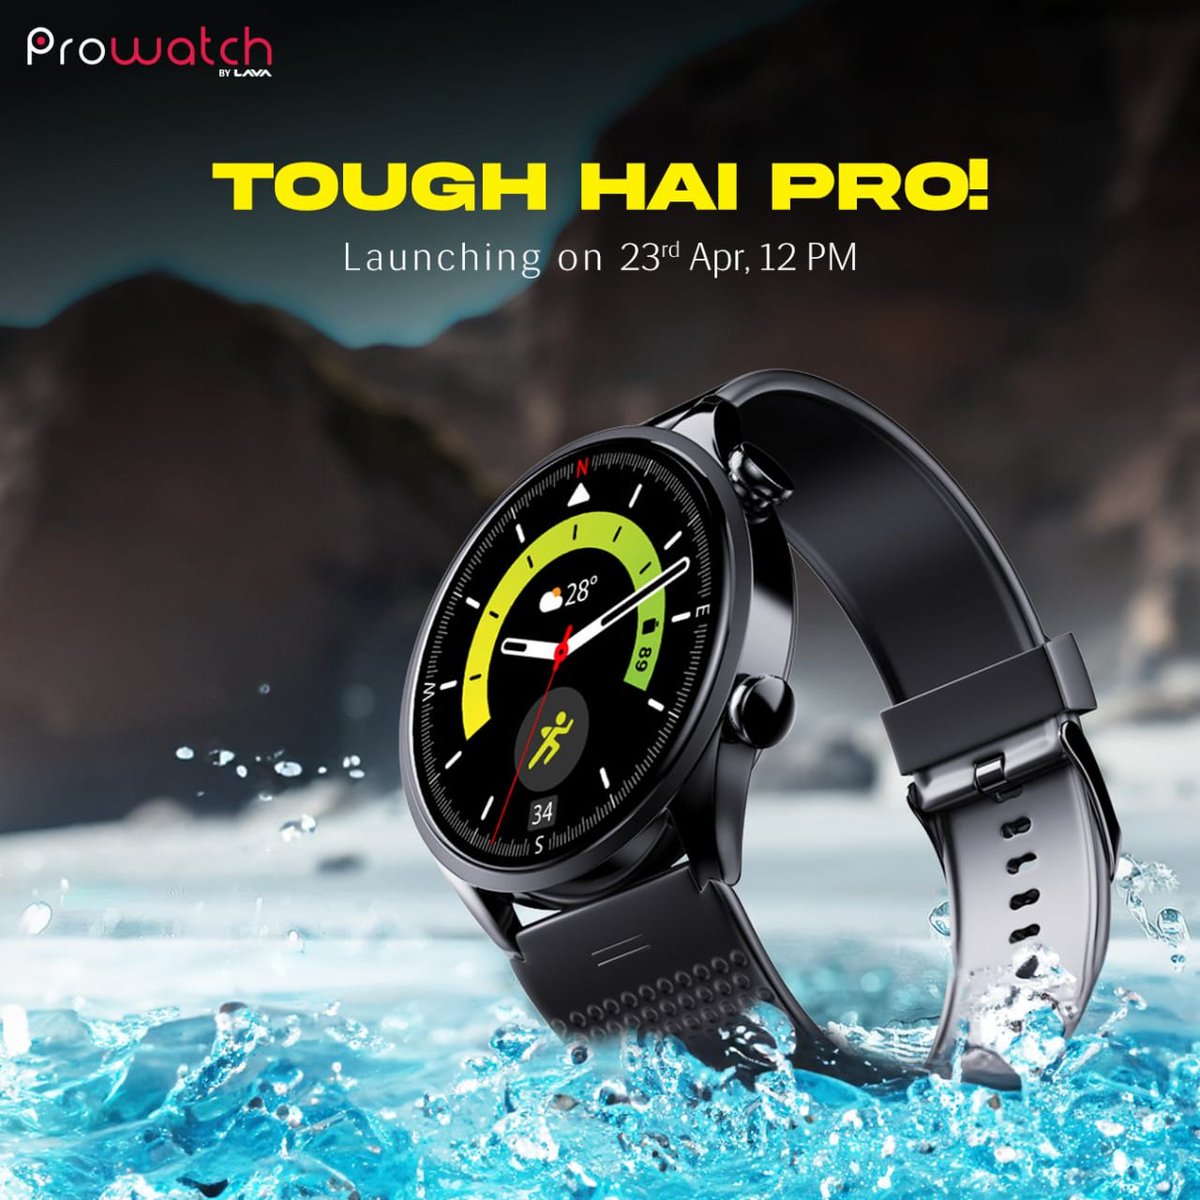 Your wait is almost over! Get ready to experience  #ProwatchLaunchTomorrow , the first of its kind with Gorilla Glass 3 protection and a focus on privacy.